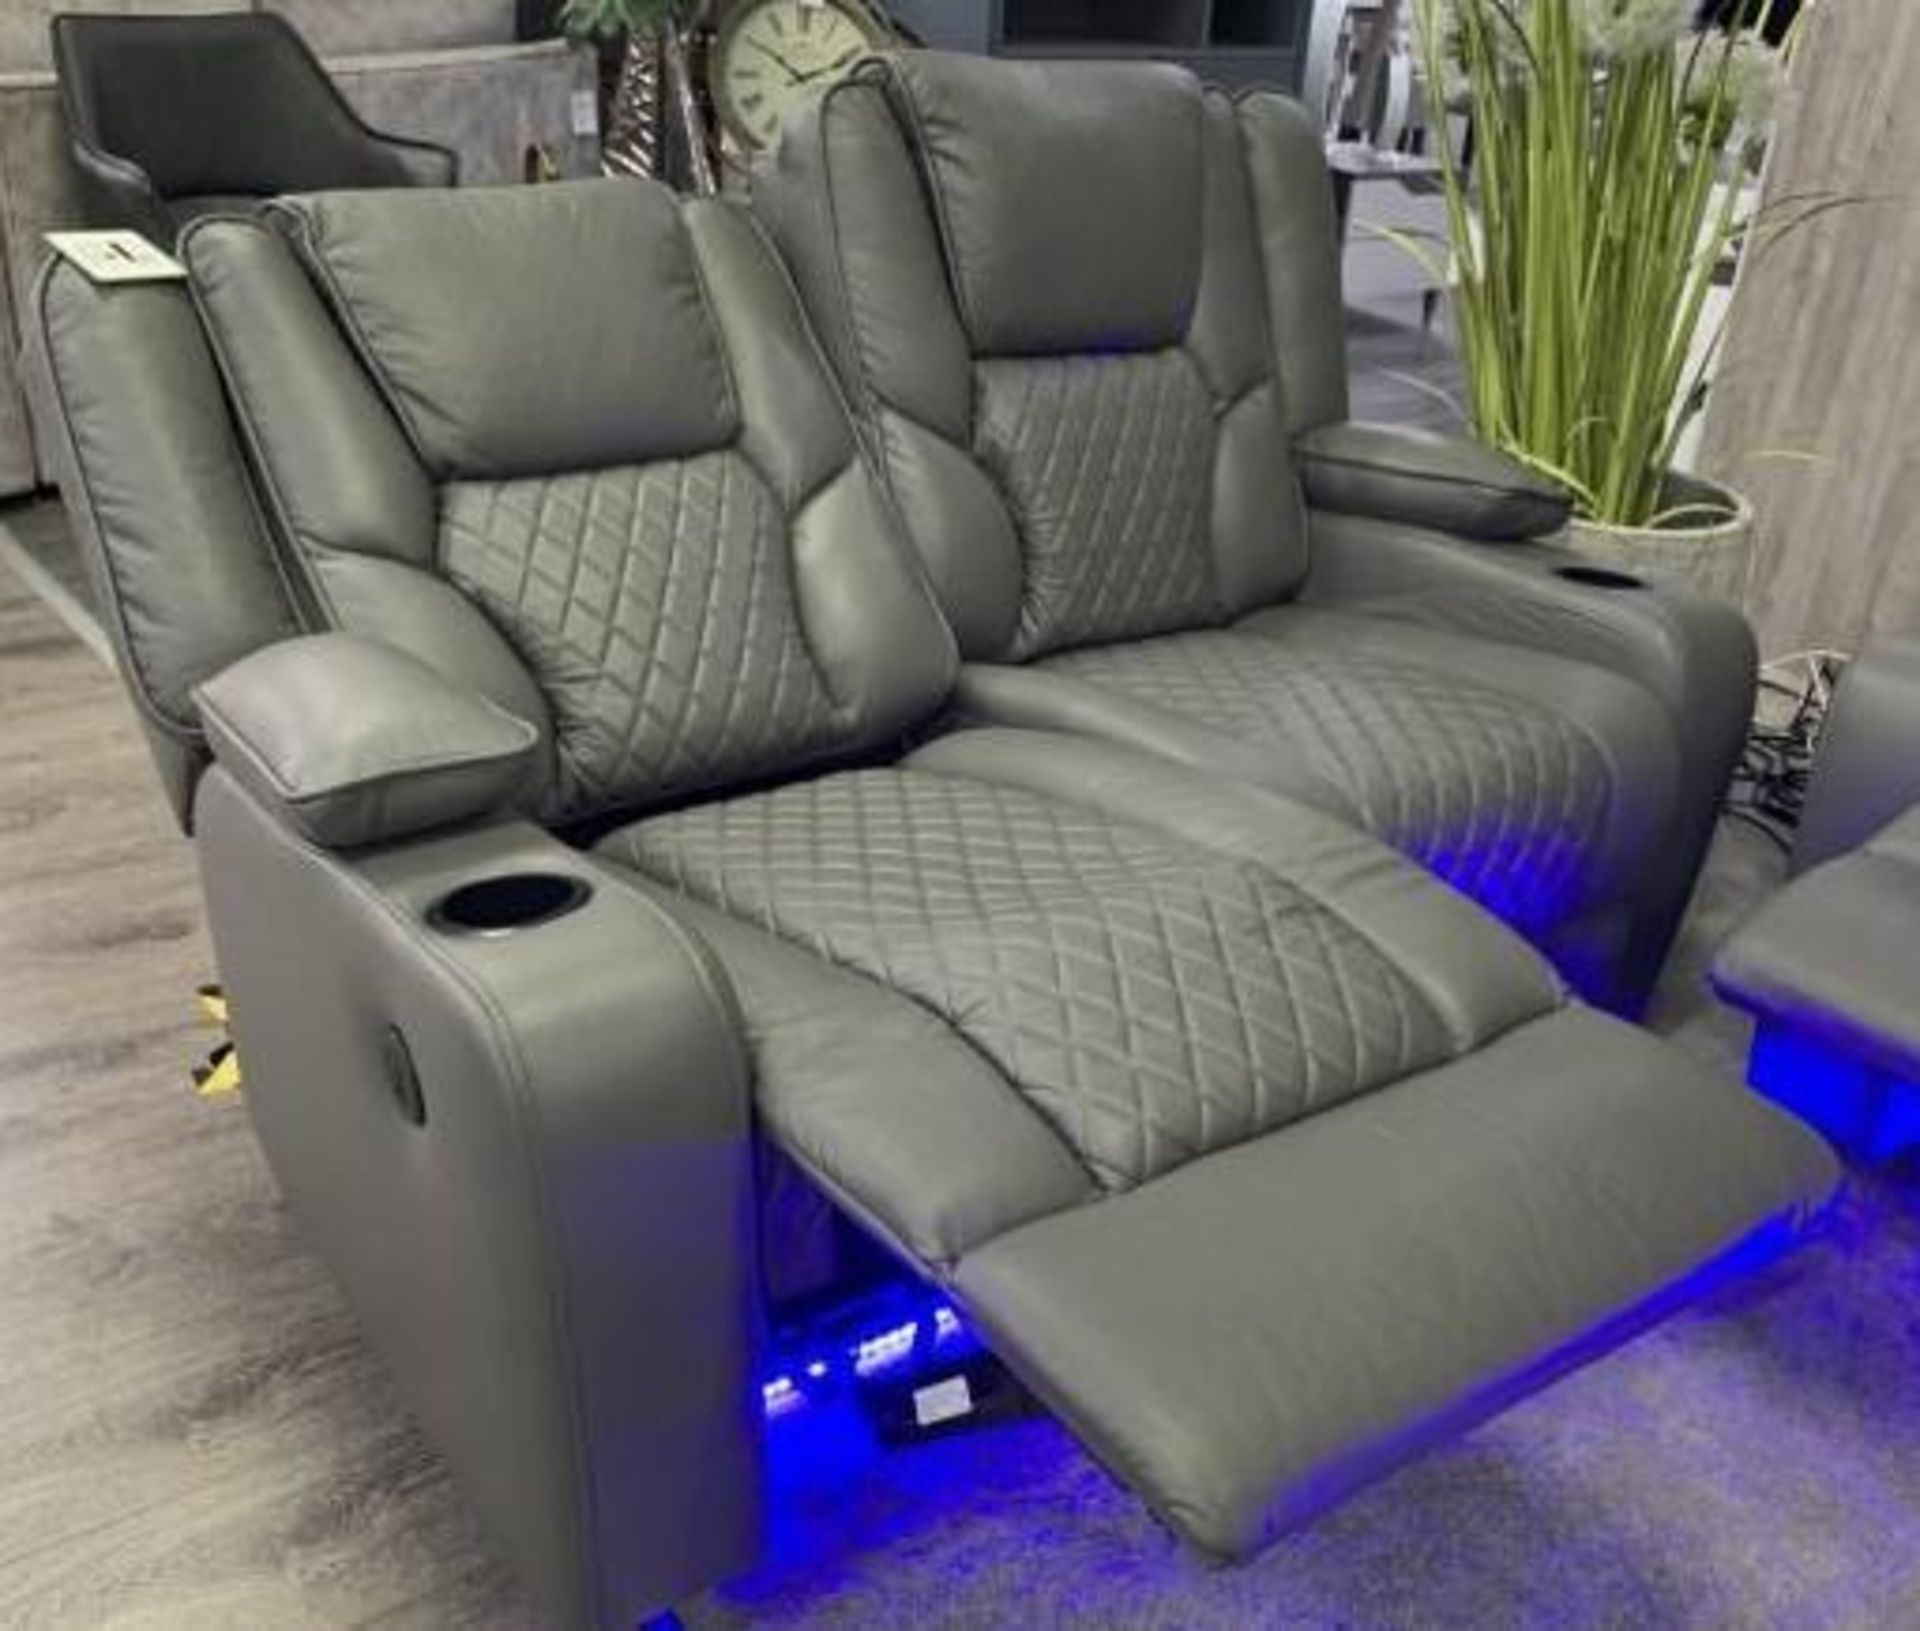 2 X NEW Grey Leather 2 Seater Electric Recliner With USB Charging Port and Floor lights.